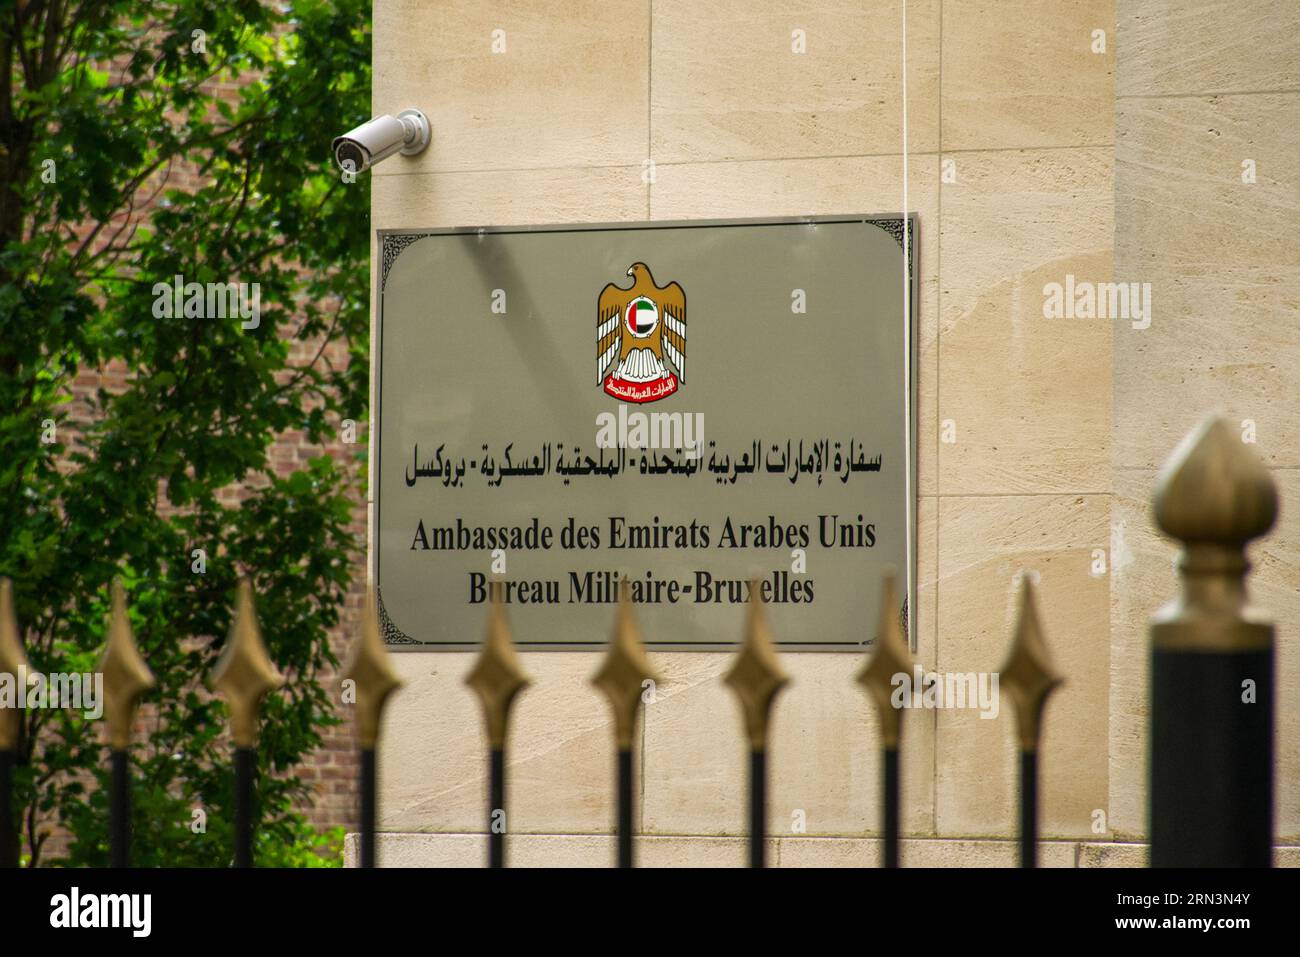 Exteriour of the Ambassade des Emirats Arabes Unis in Brussels, Belgium. With fence and surveillance camera. Stock Photo